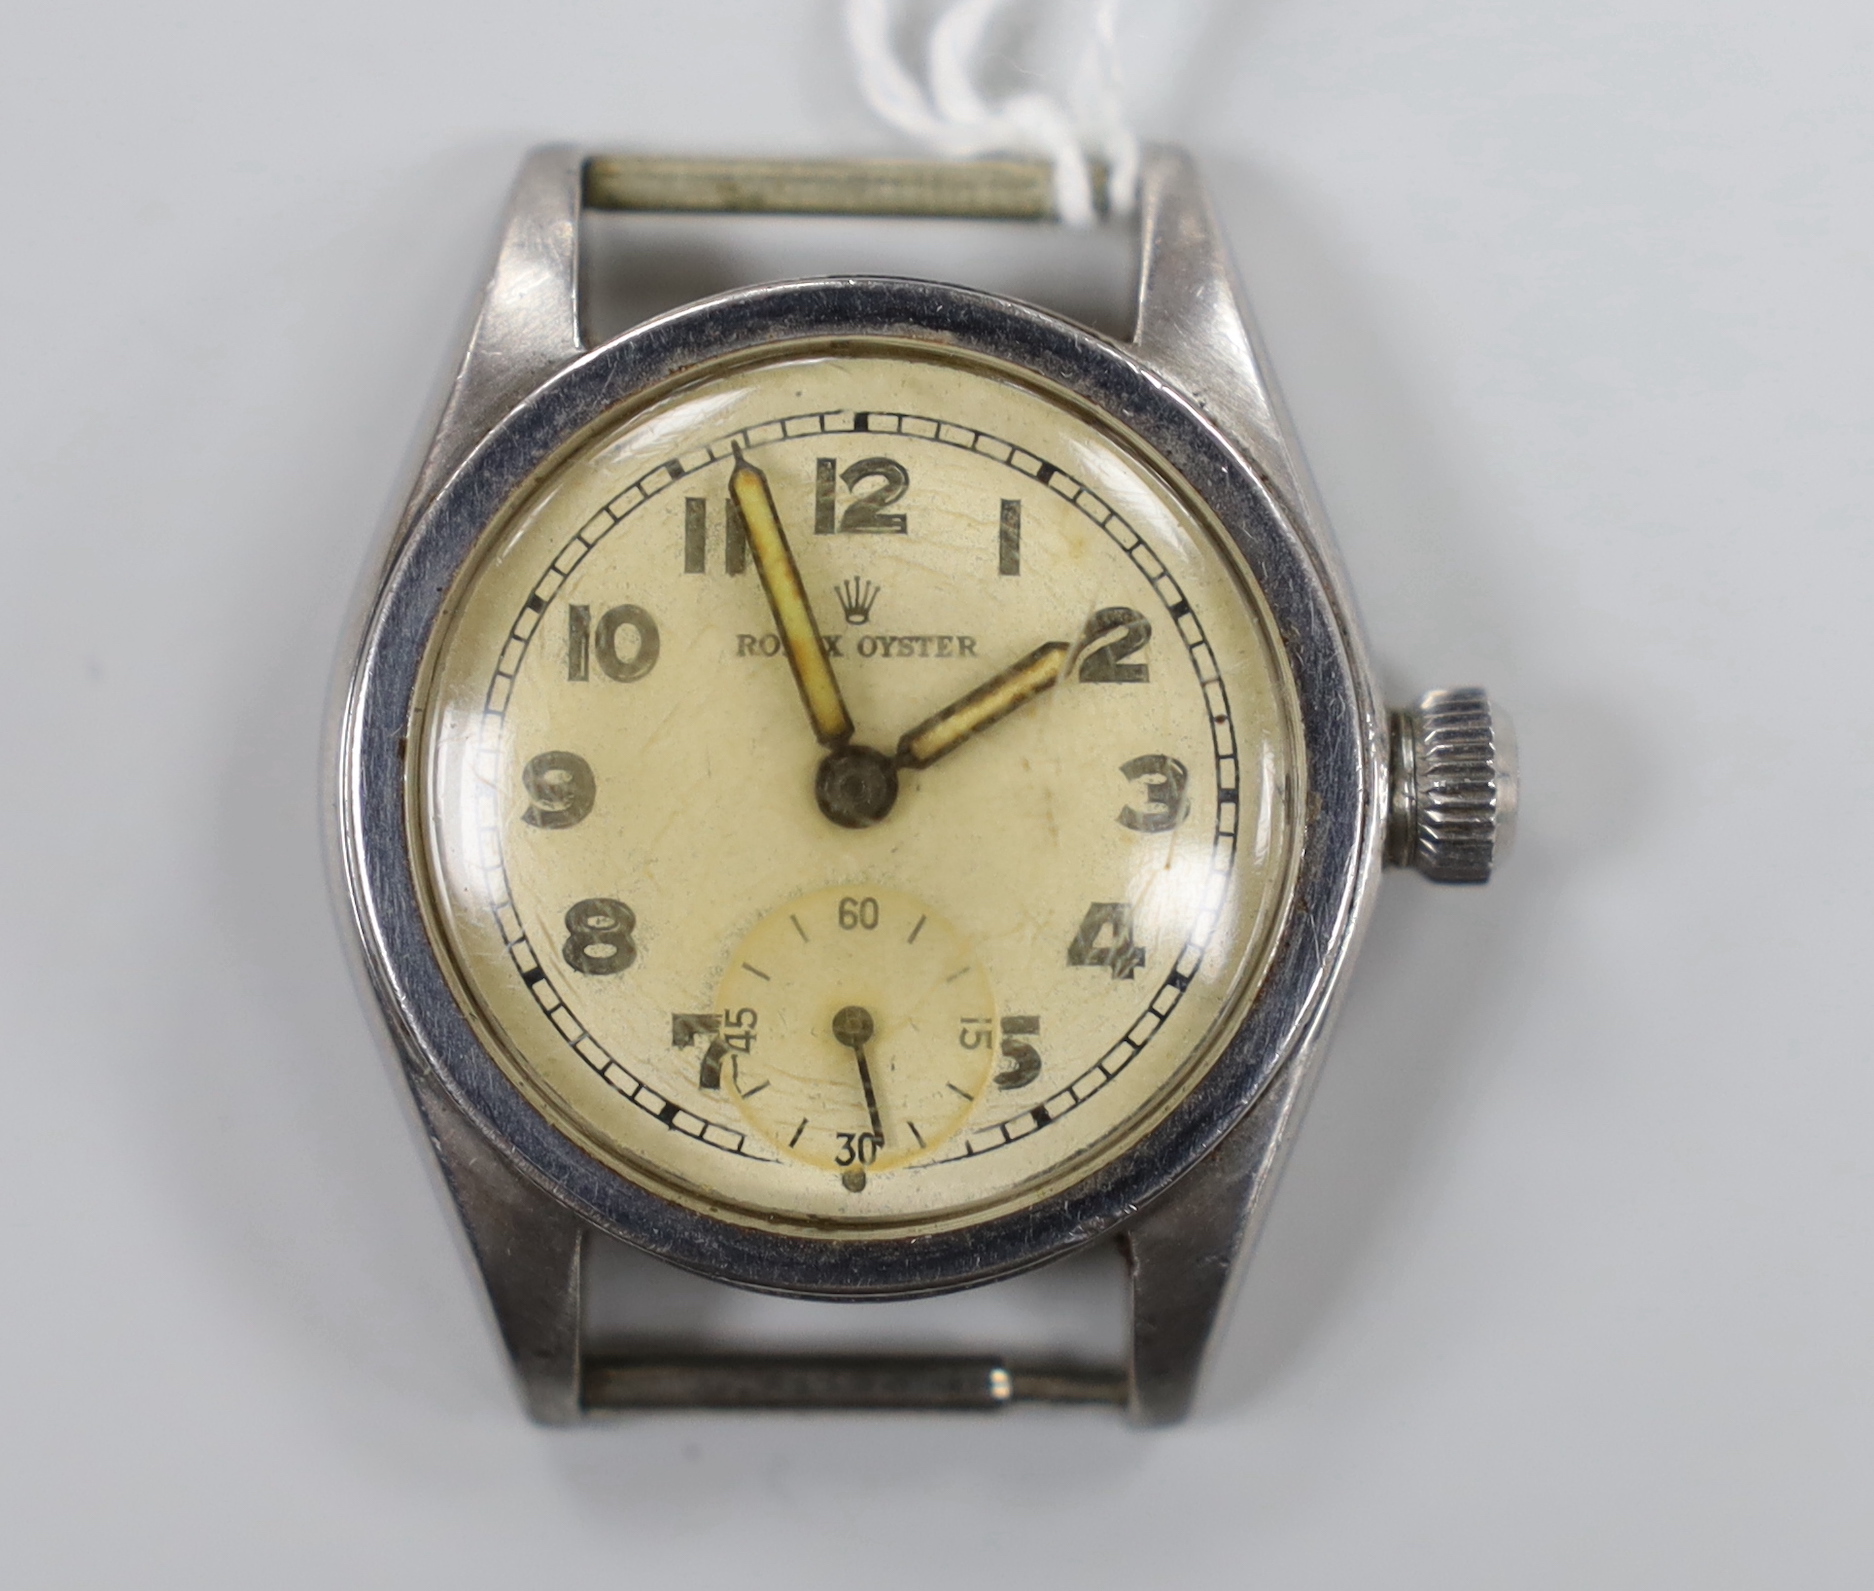 A 1940's boy's size stainless steel Rolex Oyster manual wind wrist watch, no strap, case diameter 30mm, with case back inscription.